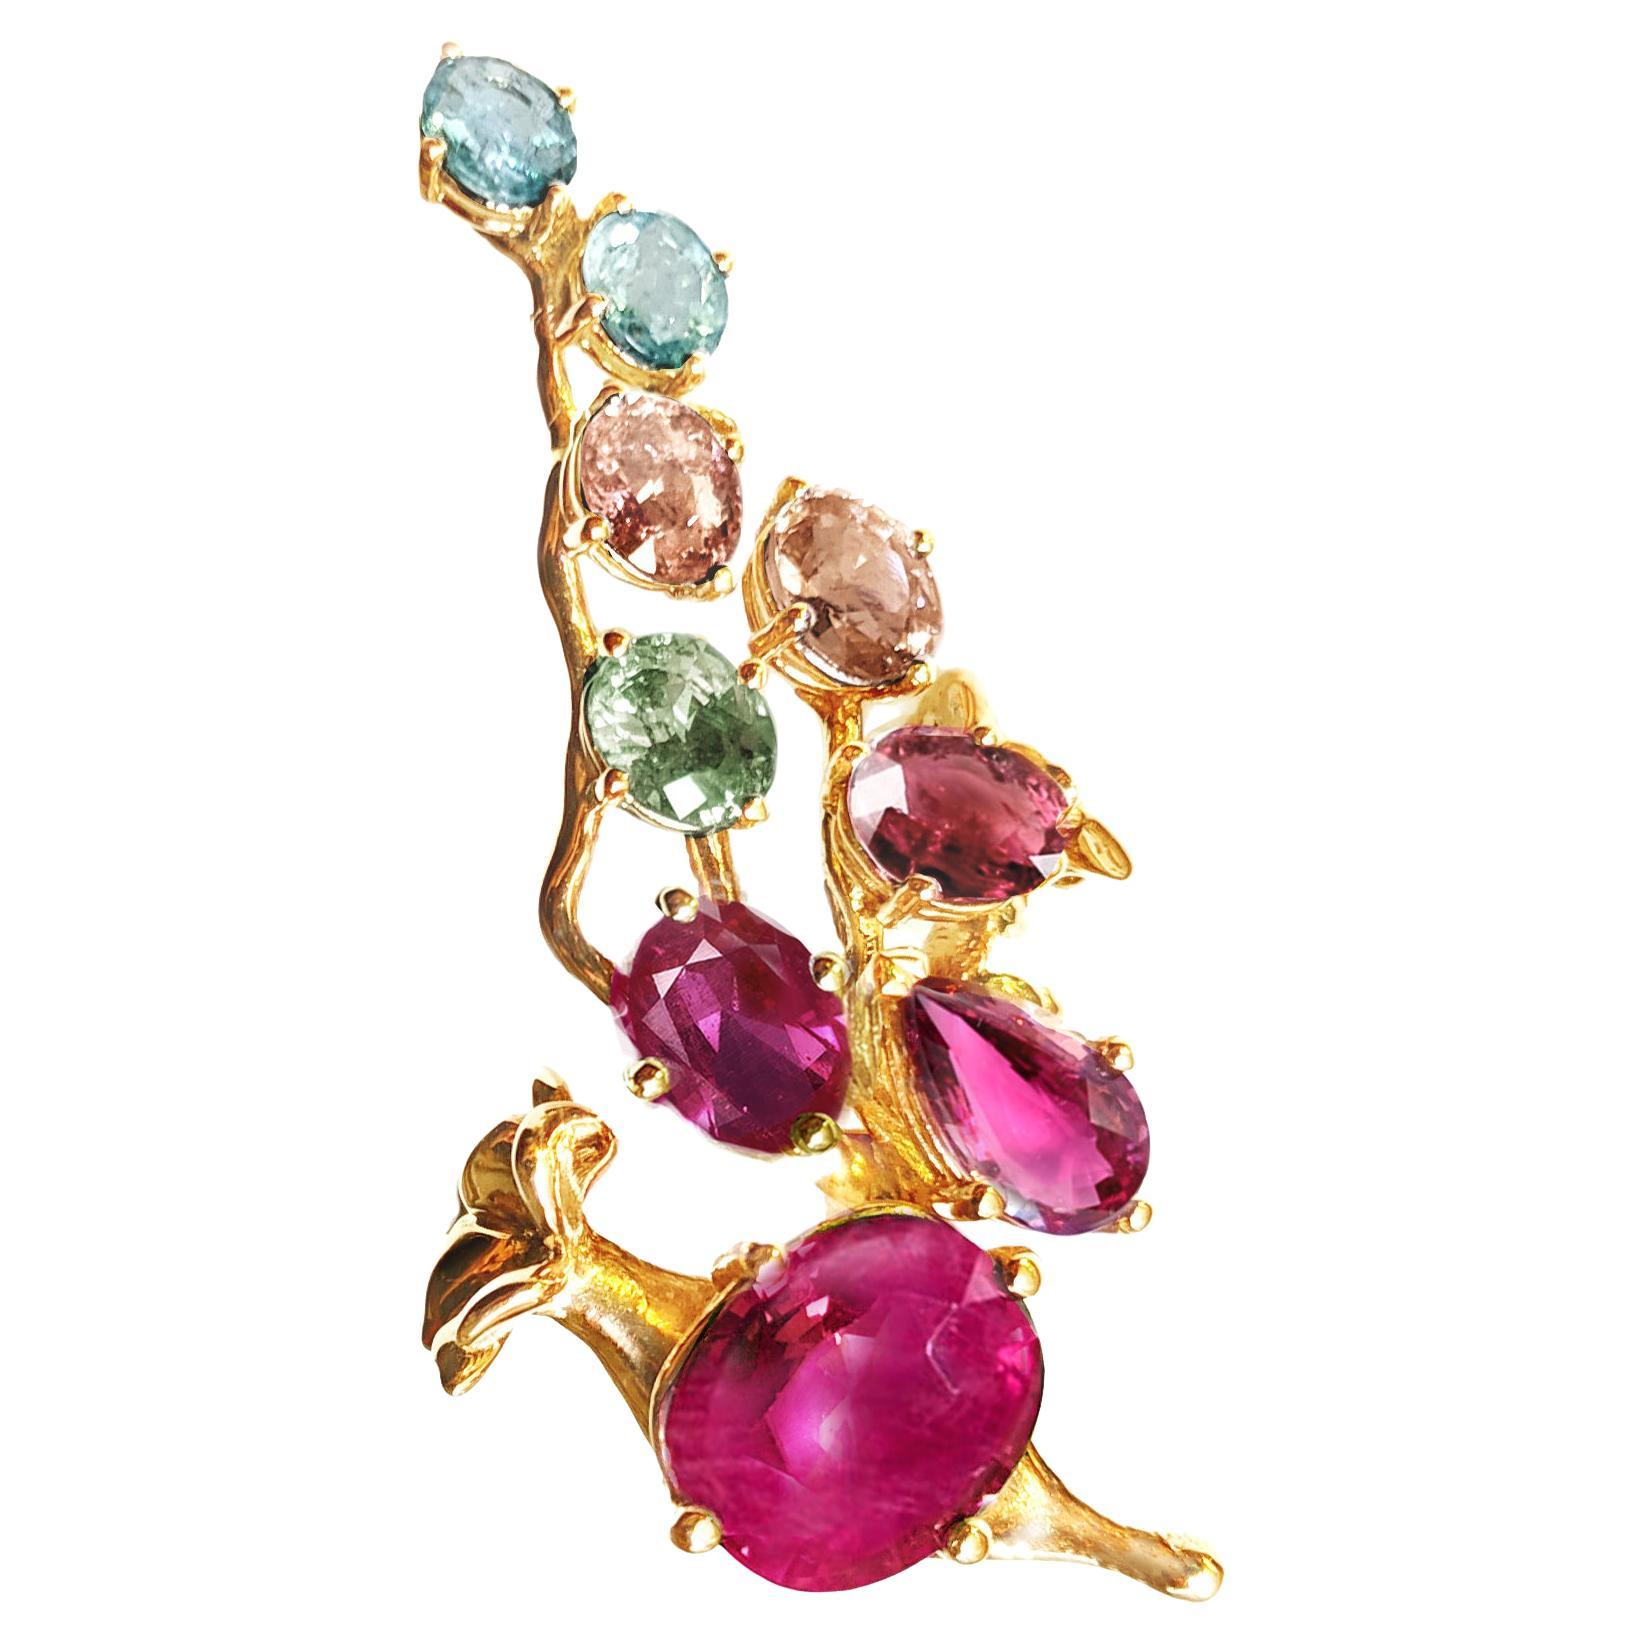 Eighteen Karat Gold Sapphires Pendant Necklace with Pink Rubies and Garnets